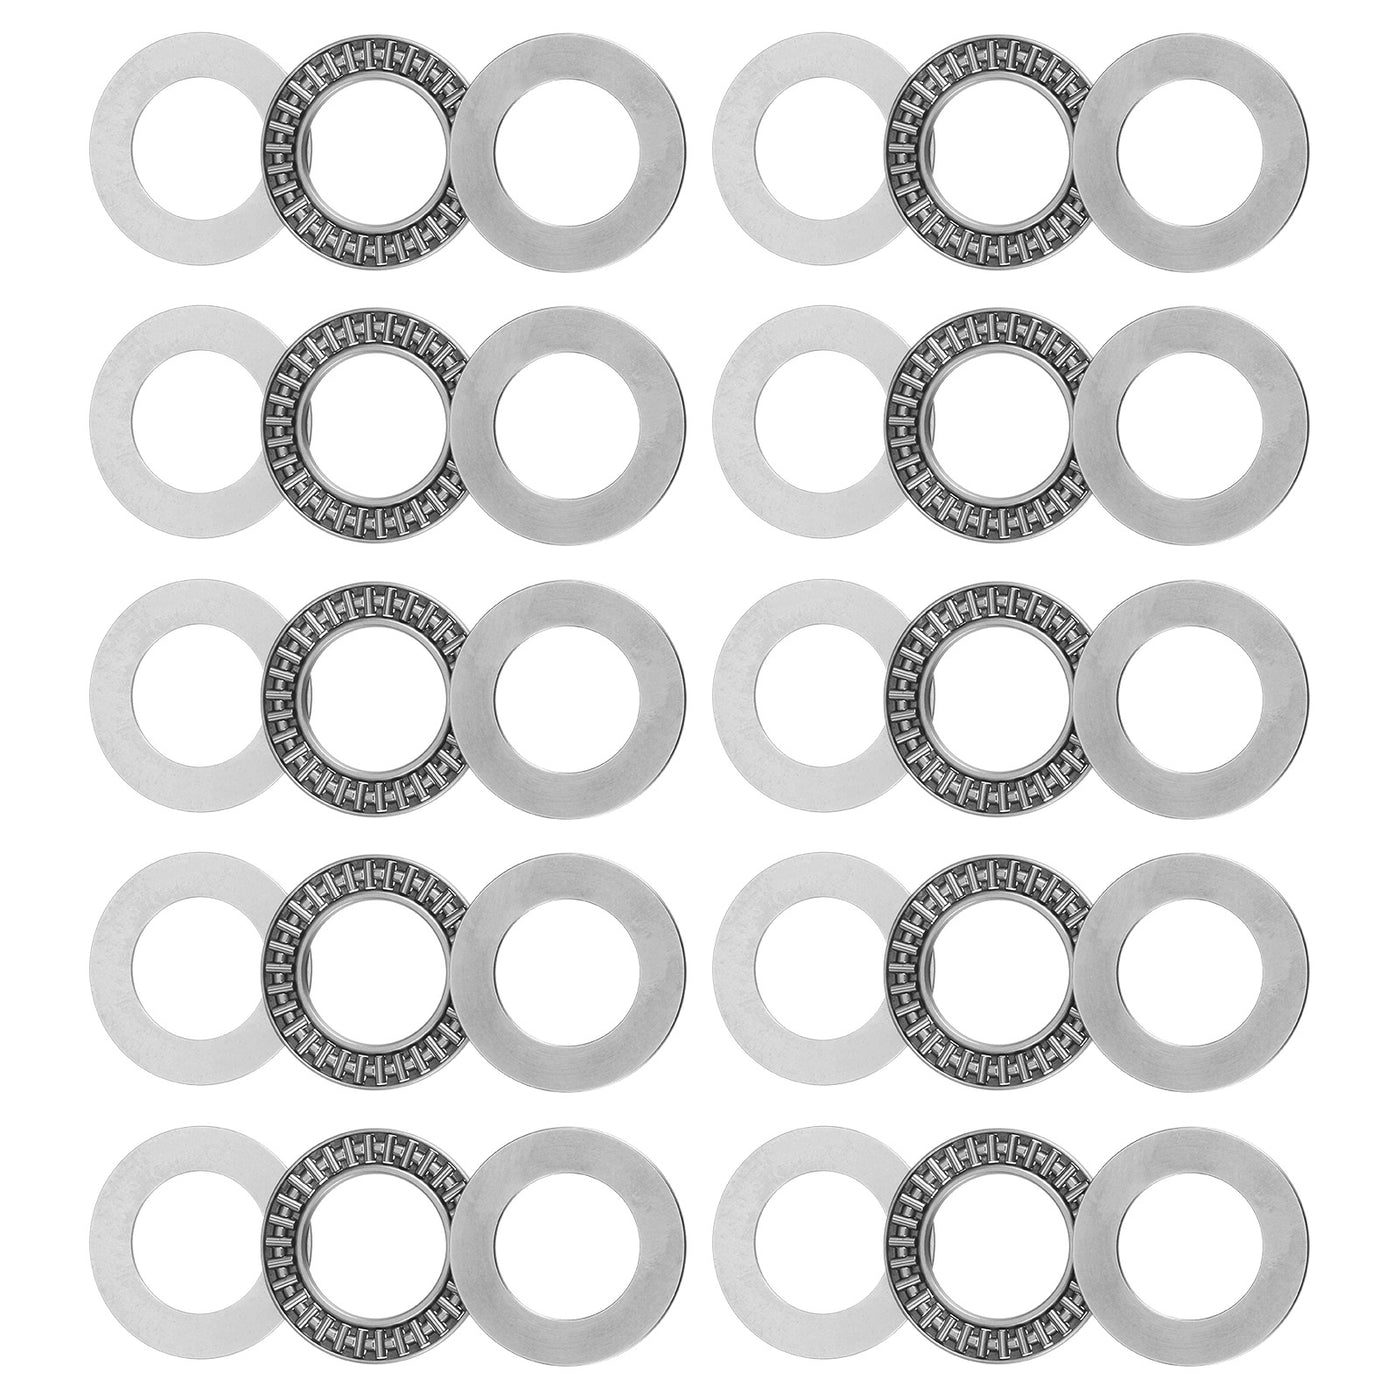 uxcell Uxcell AXK2542 Thrust Needle Roller Bearings 25x42x2mm with AS2542 Washers 10pcs